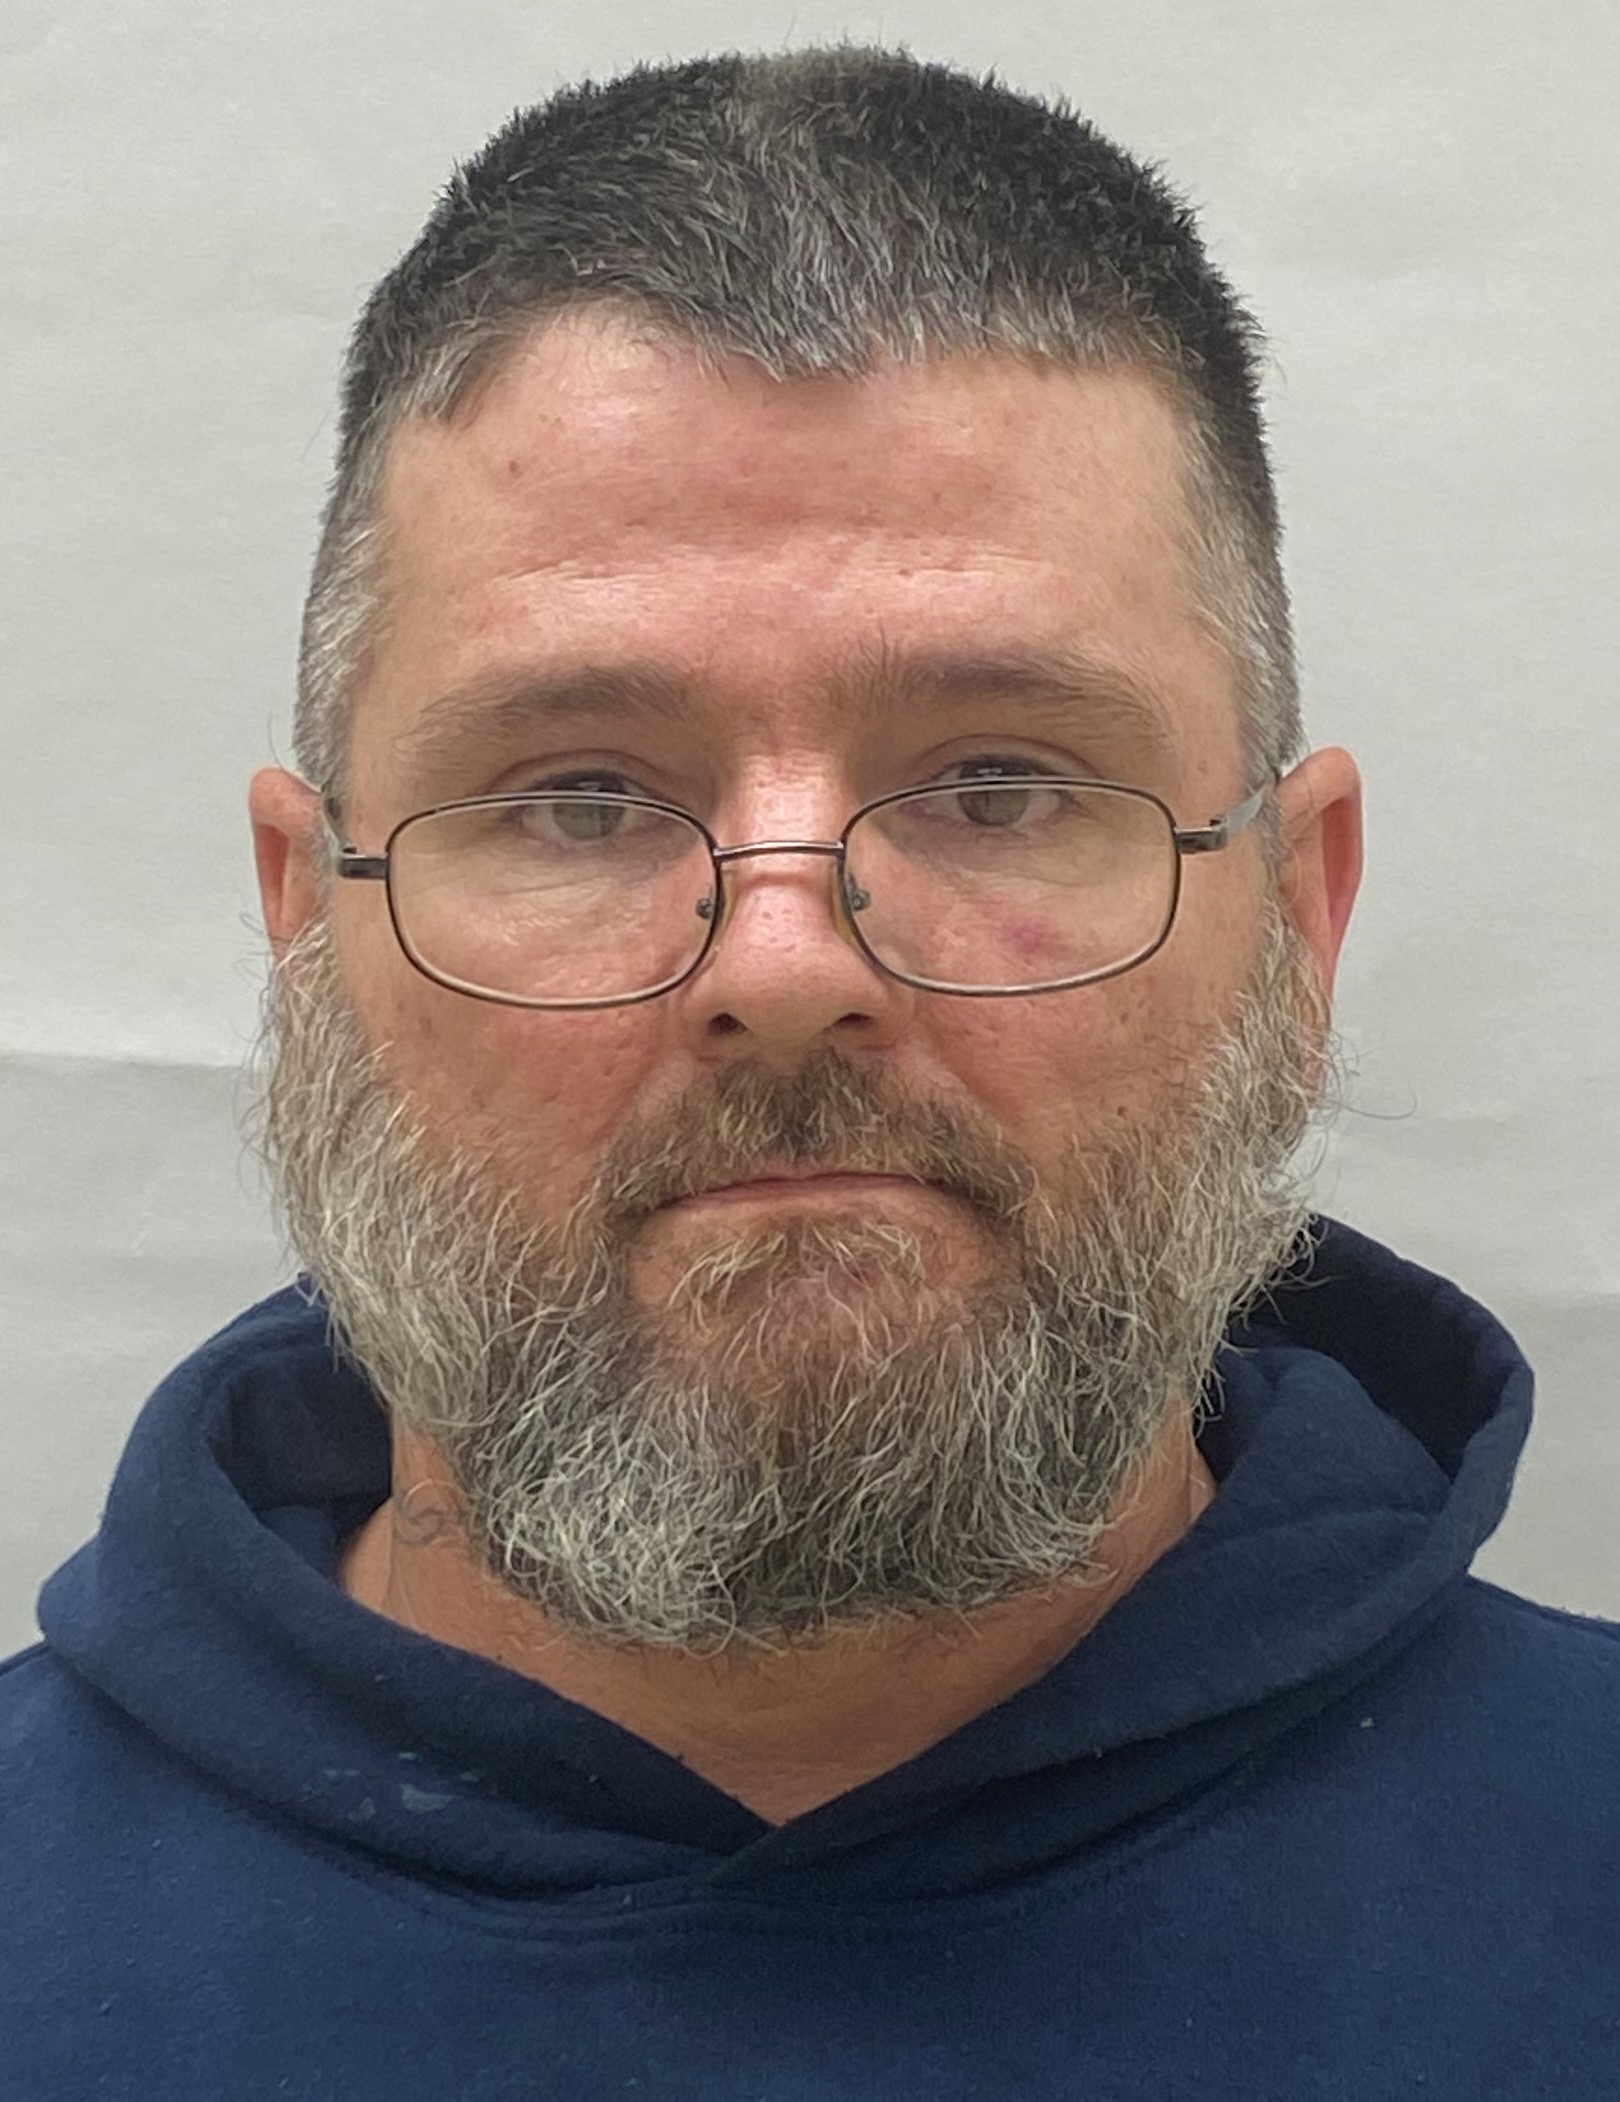 Offender Information Kentucky Department of Corrections Offender